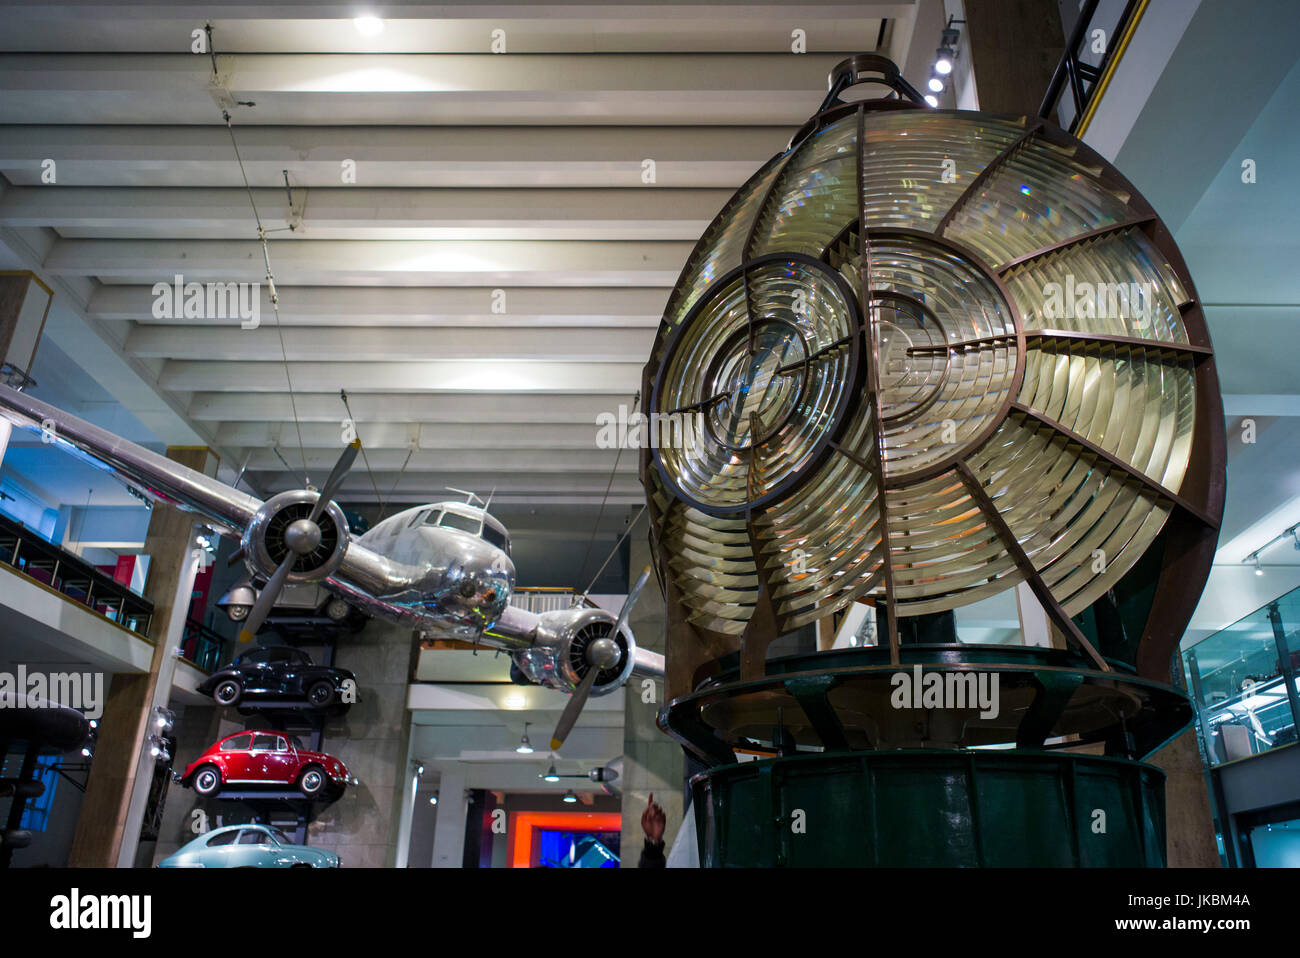 England, London, South Kensington, Science Museum, aircraft in transportation hall Stock Photo